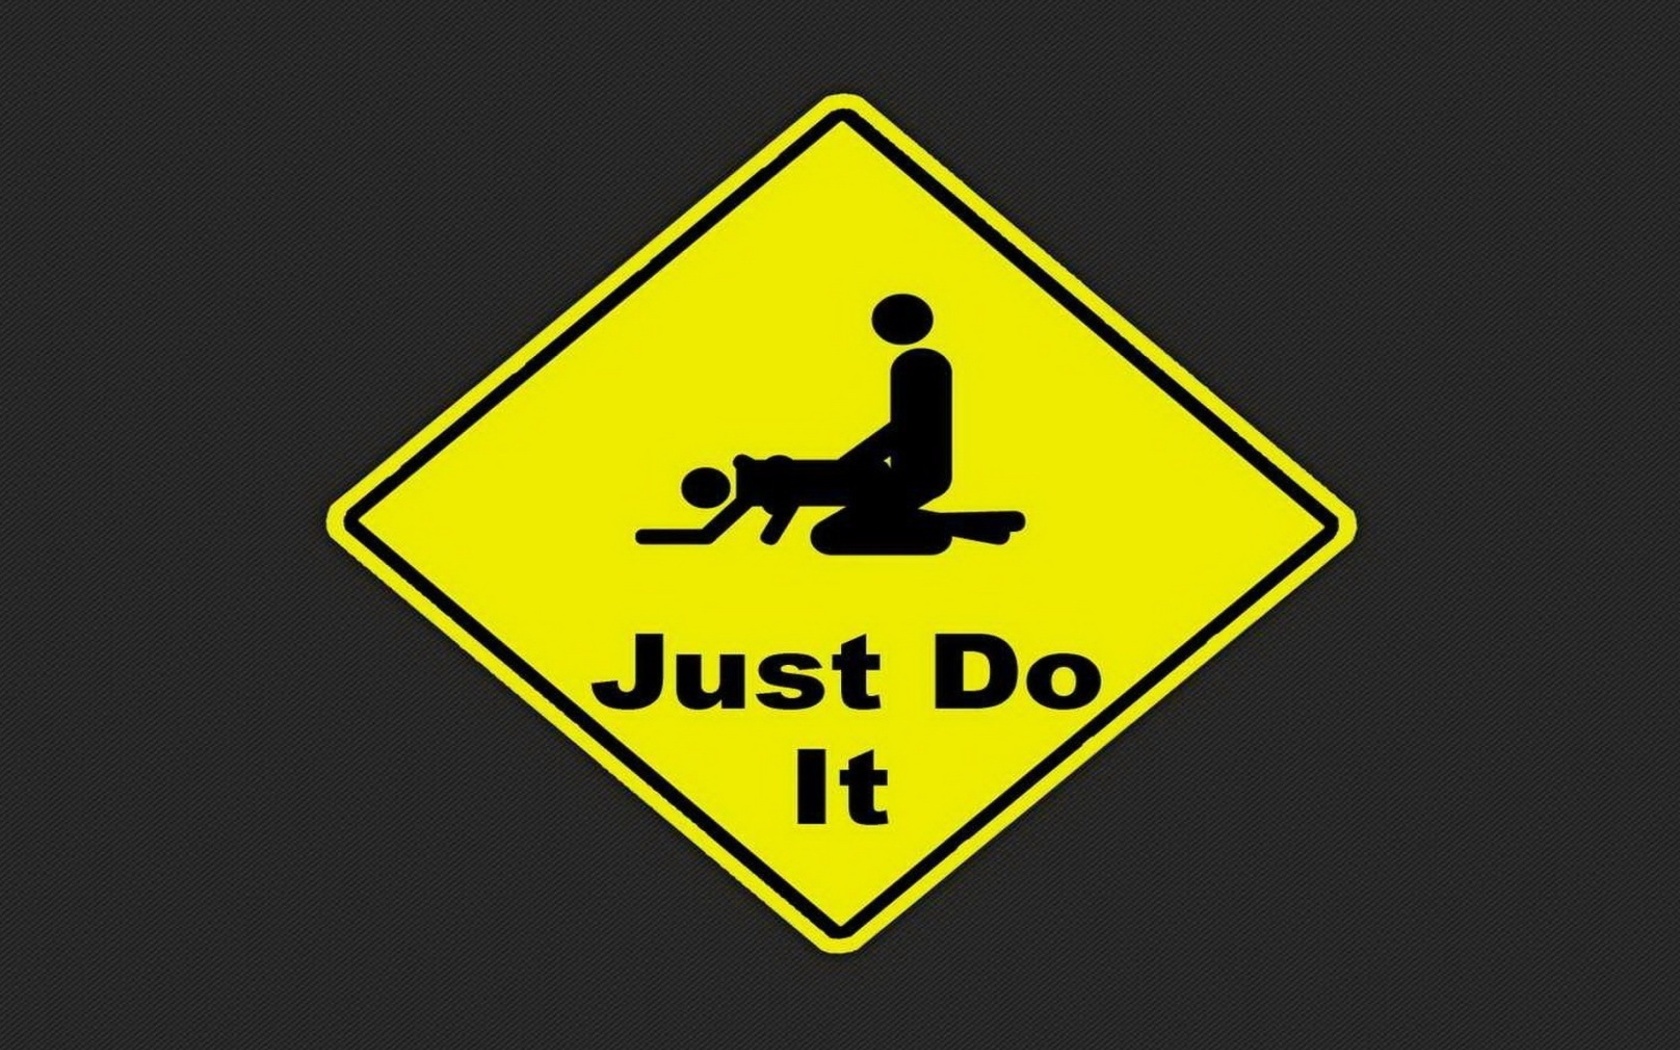 Das Just Do It Funny Sign Wallpaper 1680x1050